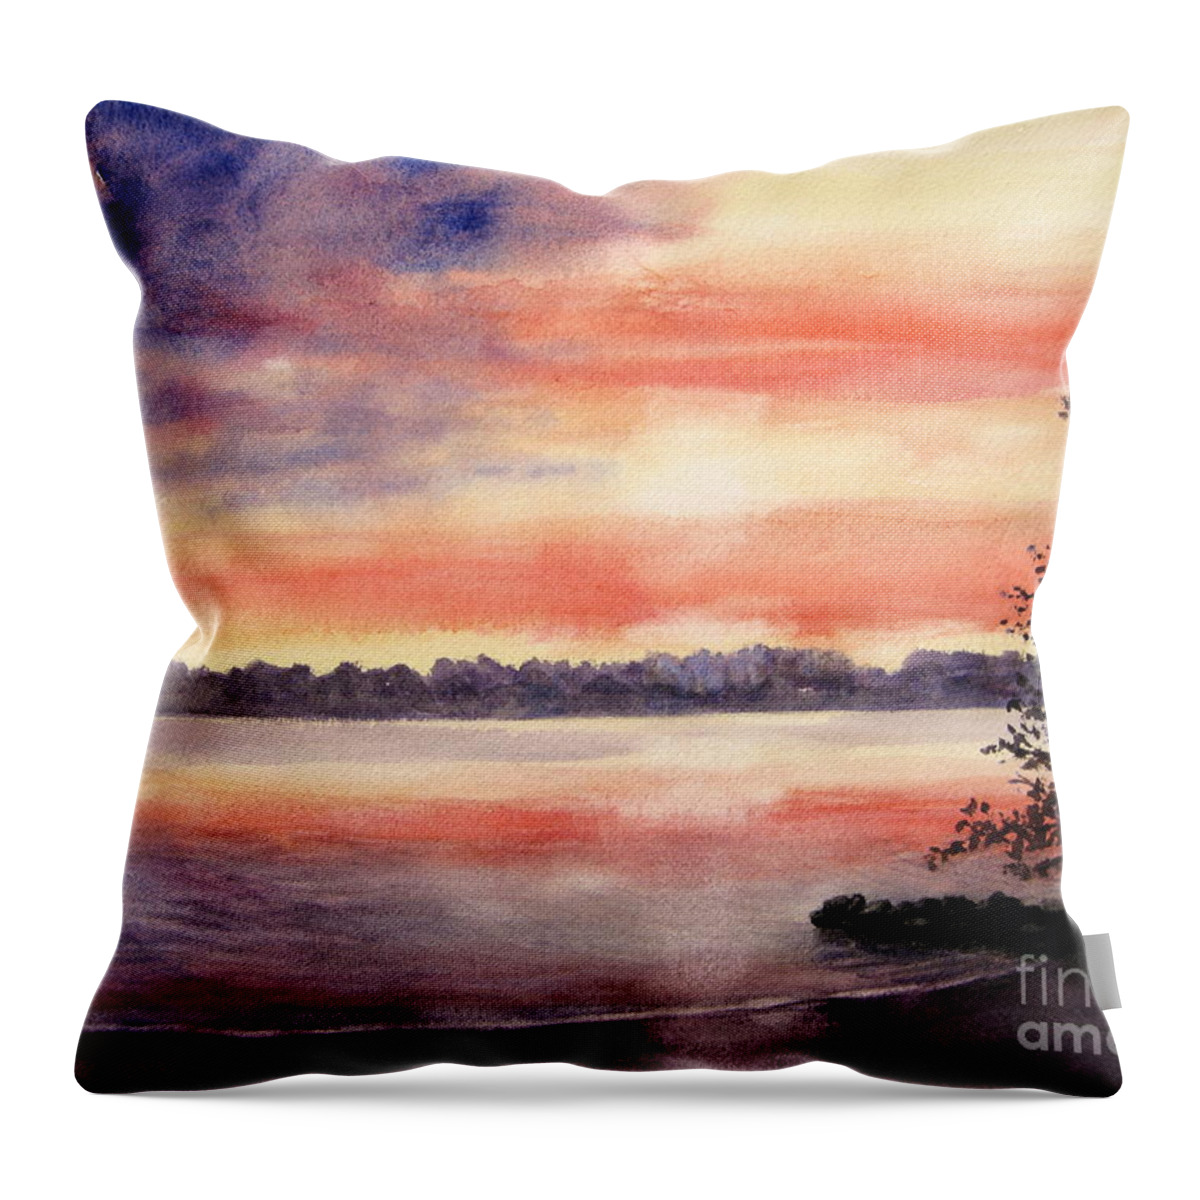 Tega Cay Throw Pillow featuring the painting Patriotic Windjammer Sky by Shirley Braithwaite Hunt